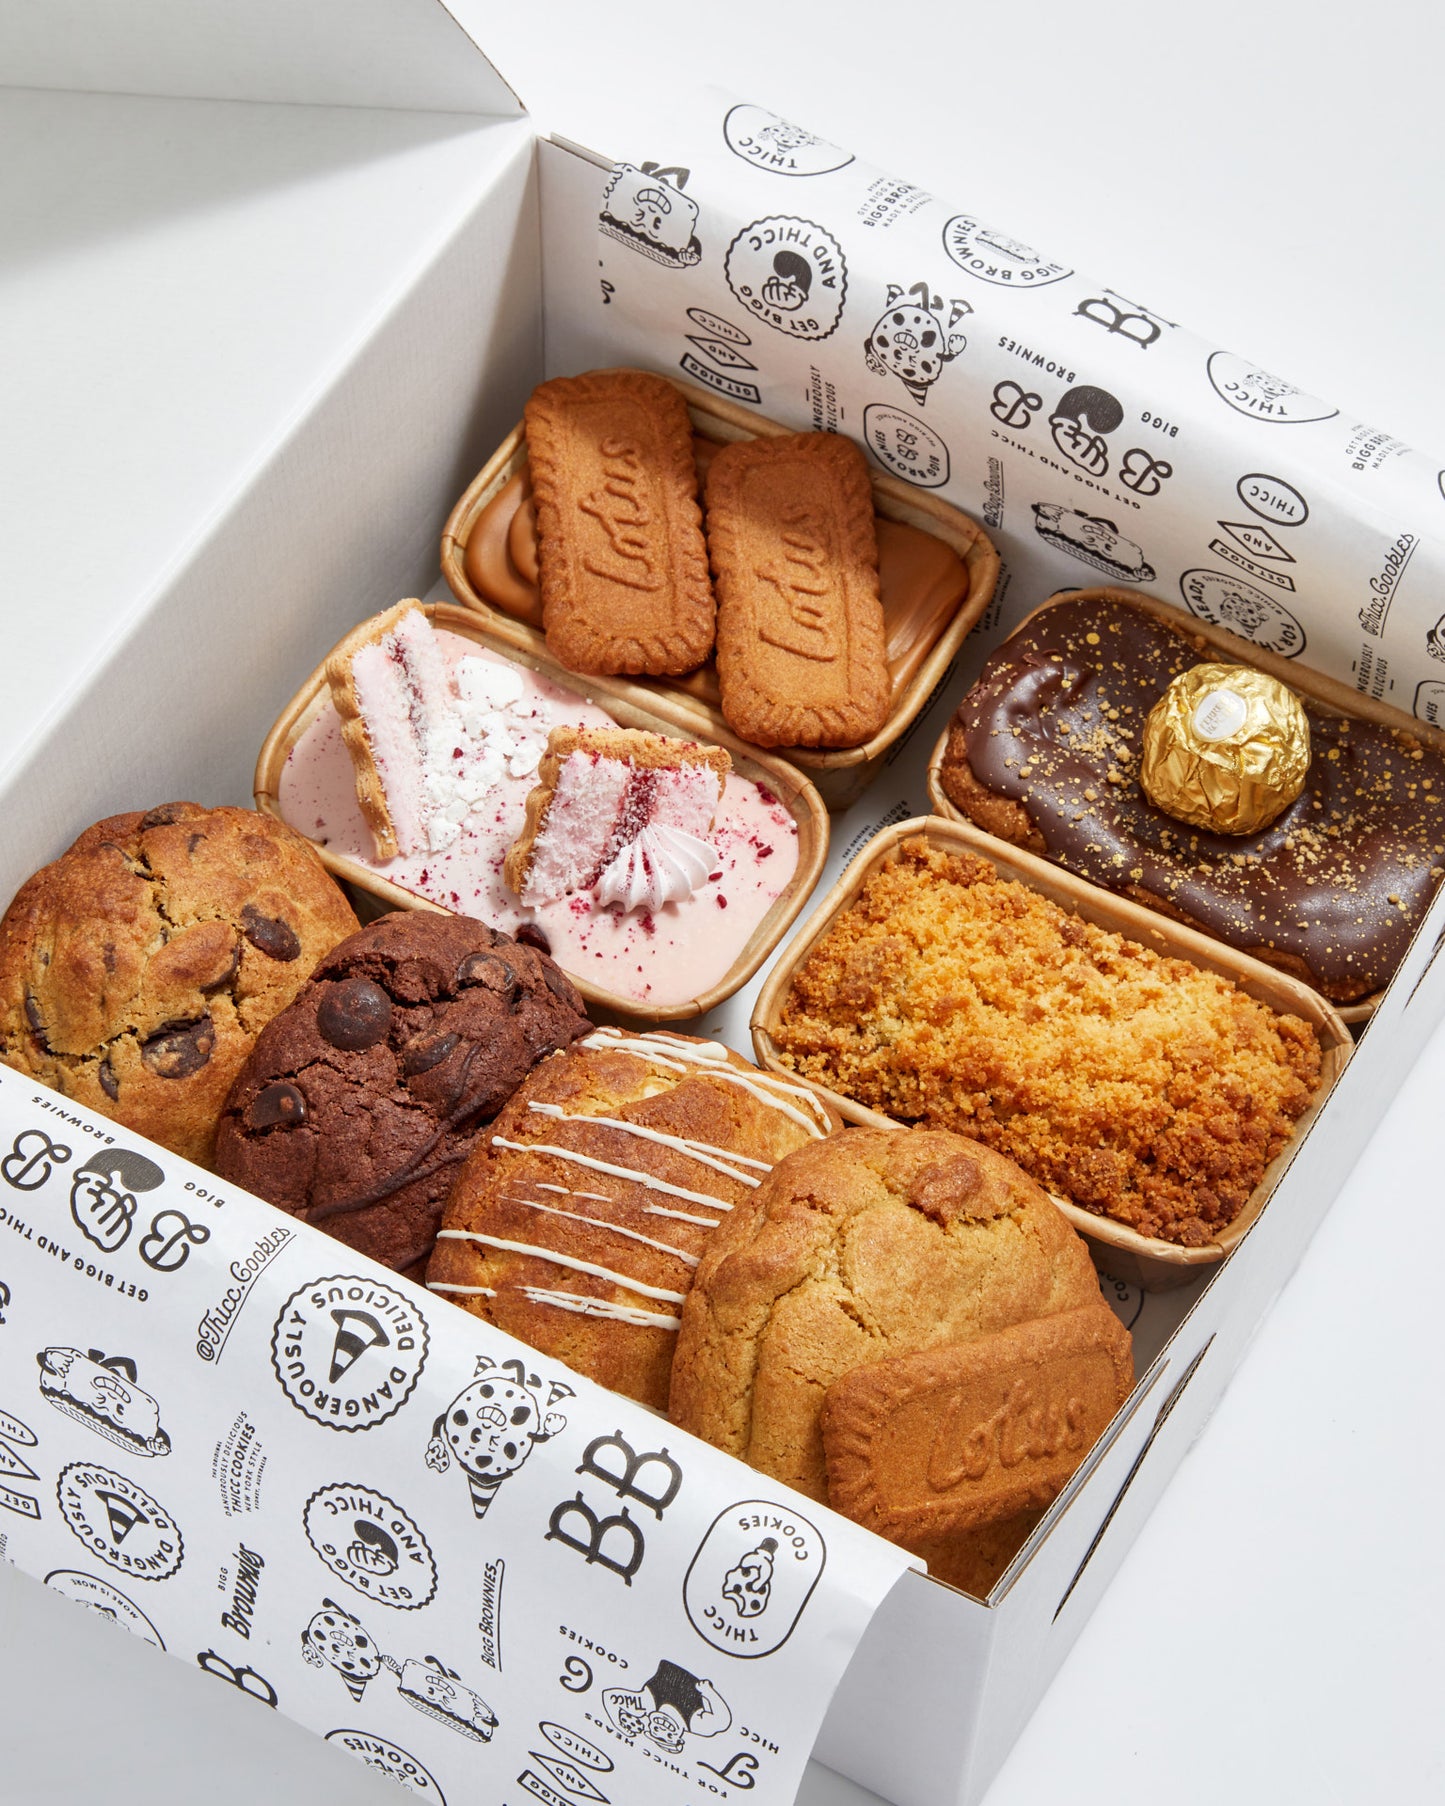 "it's a great day for cookies!" Box- BIGG Brownies & THICC Cookies - New York Style Cookies